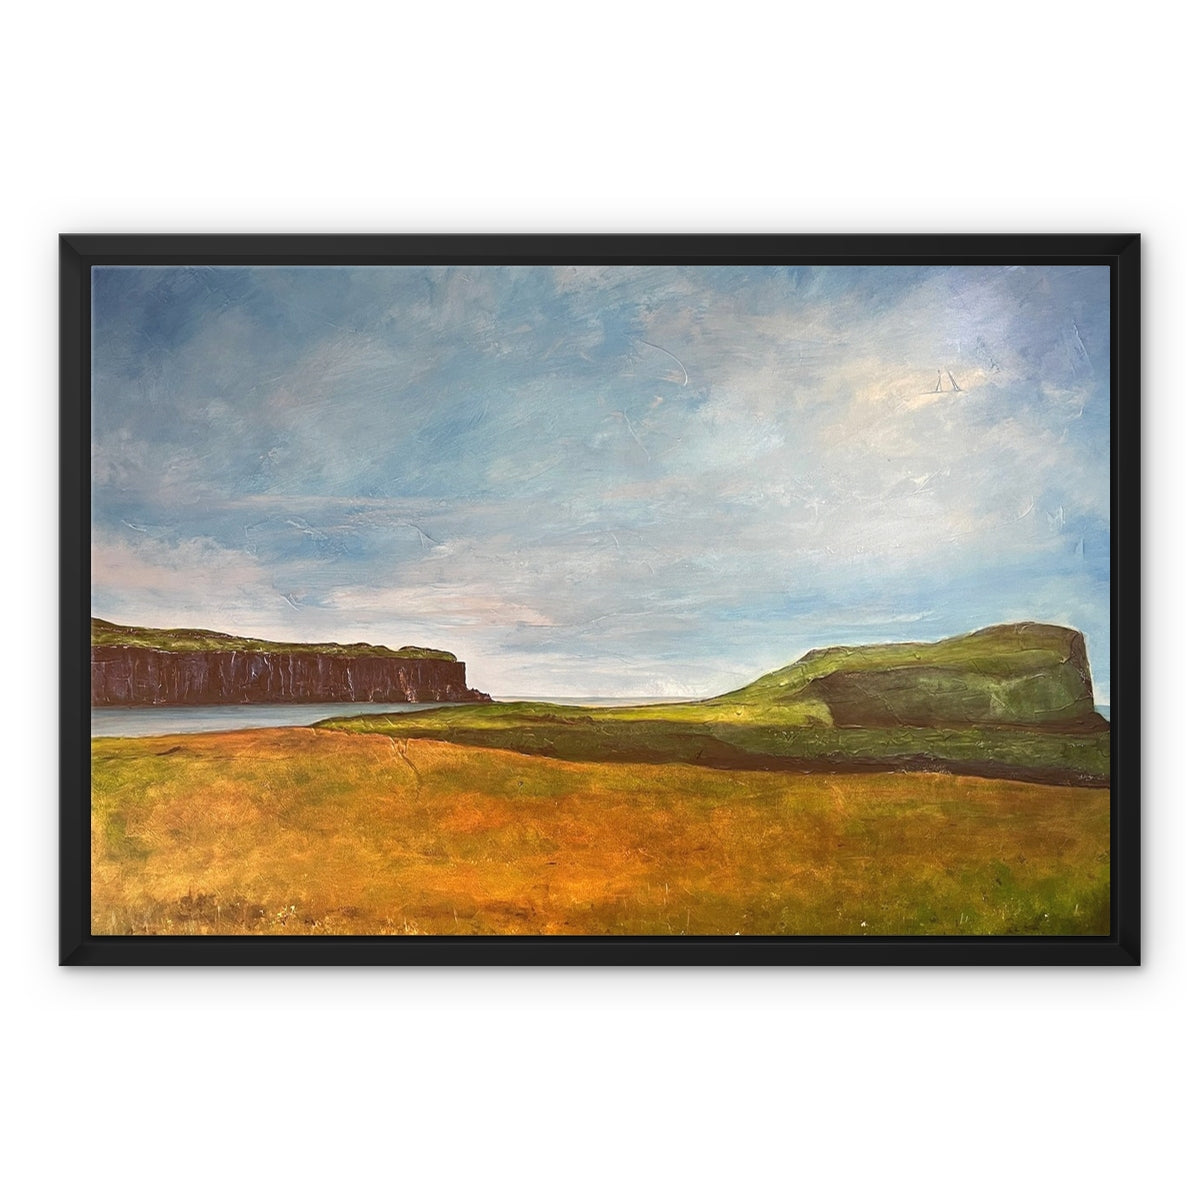 Approaching Oronsay Skye Painting | Framed Canvas From Scotland-Floating Framed Canvas Prints-Skye Art Gallery-24"x18"-Black Frame-Paintings, Prints, Homeware, Art Gifts From Scotland By Scottish Artist Kevin Hunter